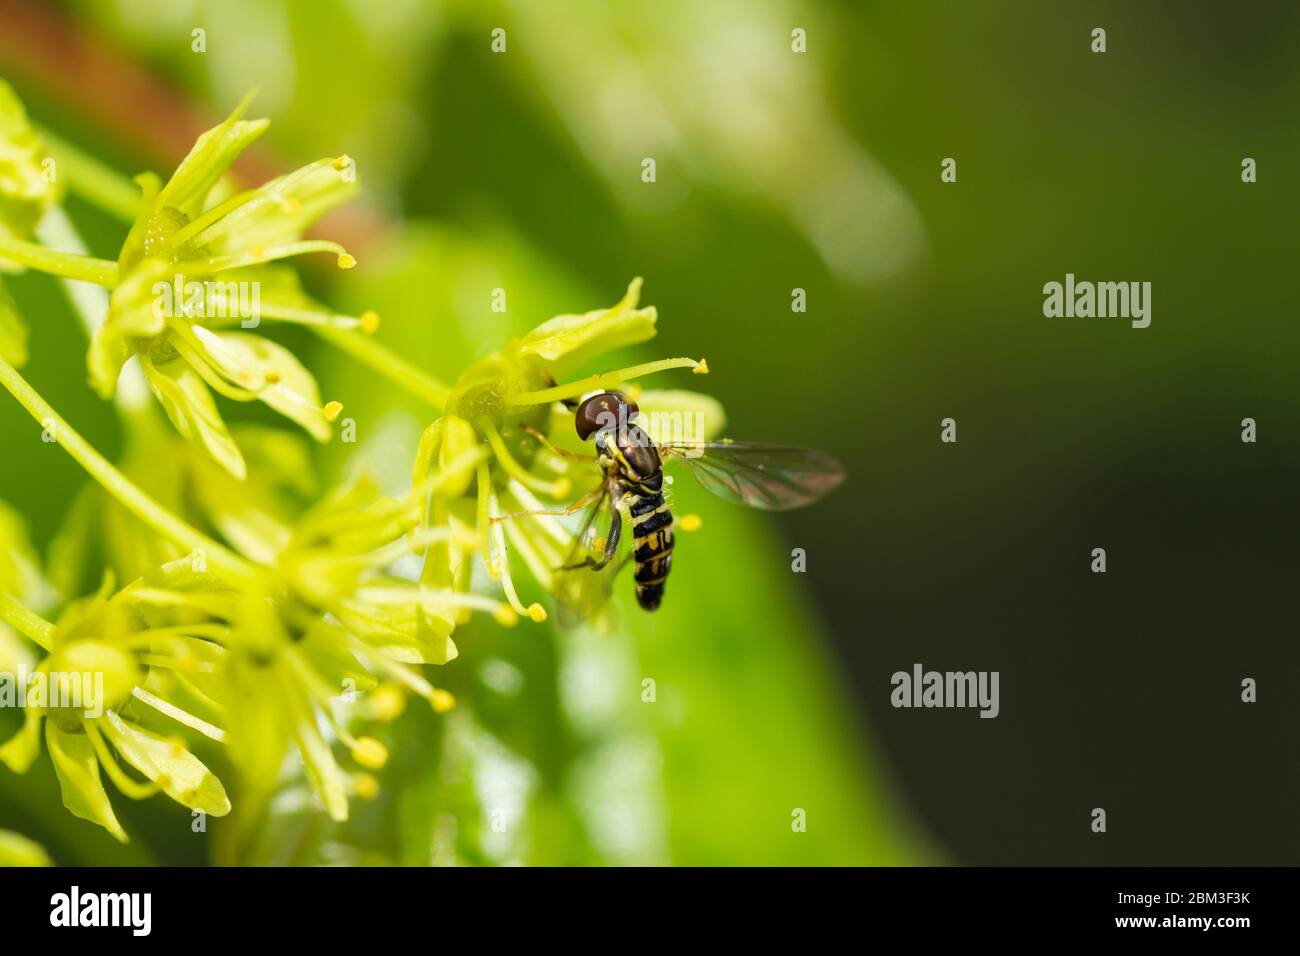 Eastern Calligrapher Fly on Norway Maple Flowers Stock Photo